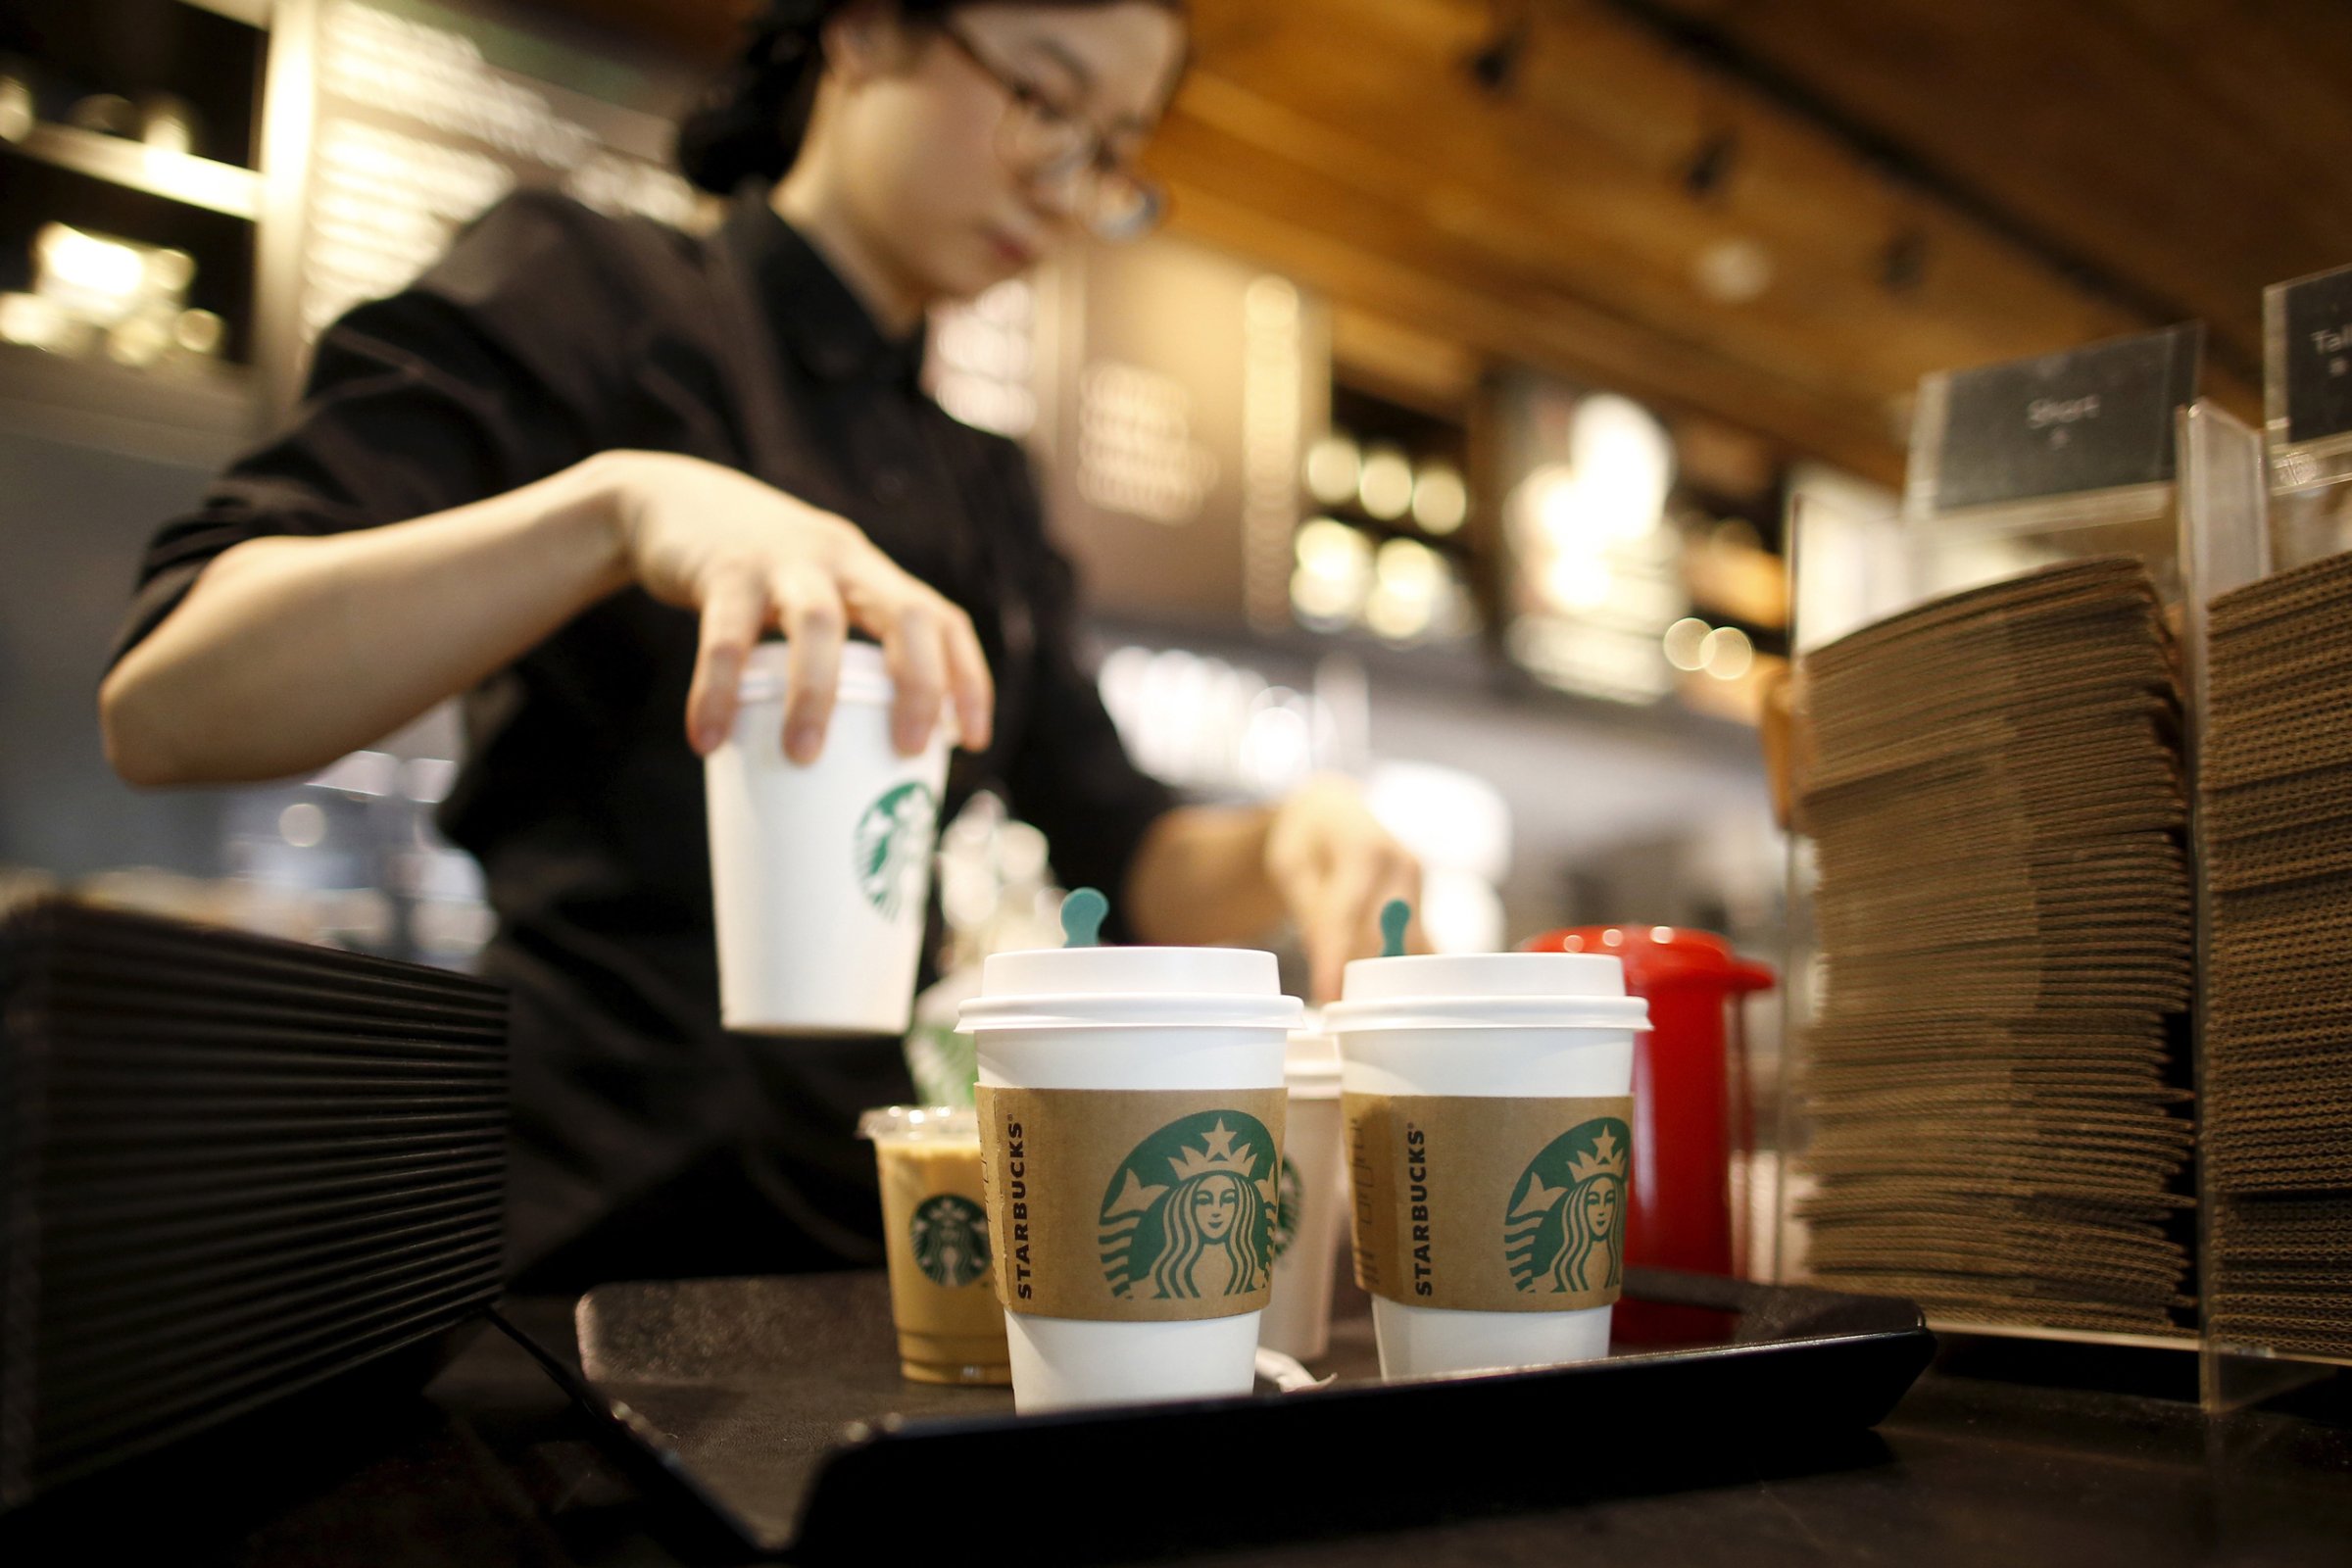 A staff serves beverages at a Starbucks coffee shop in Seoul, South Korea, March 7, 2016. Picture taken March 7, 2016. REUTERS/Kim Hong-Ji - RTSDL07